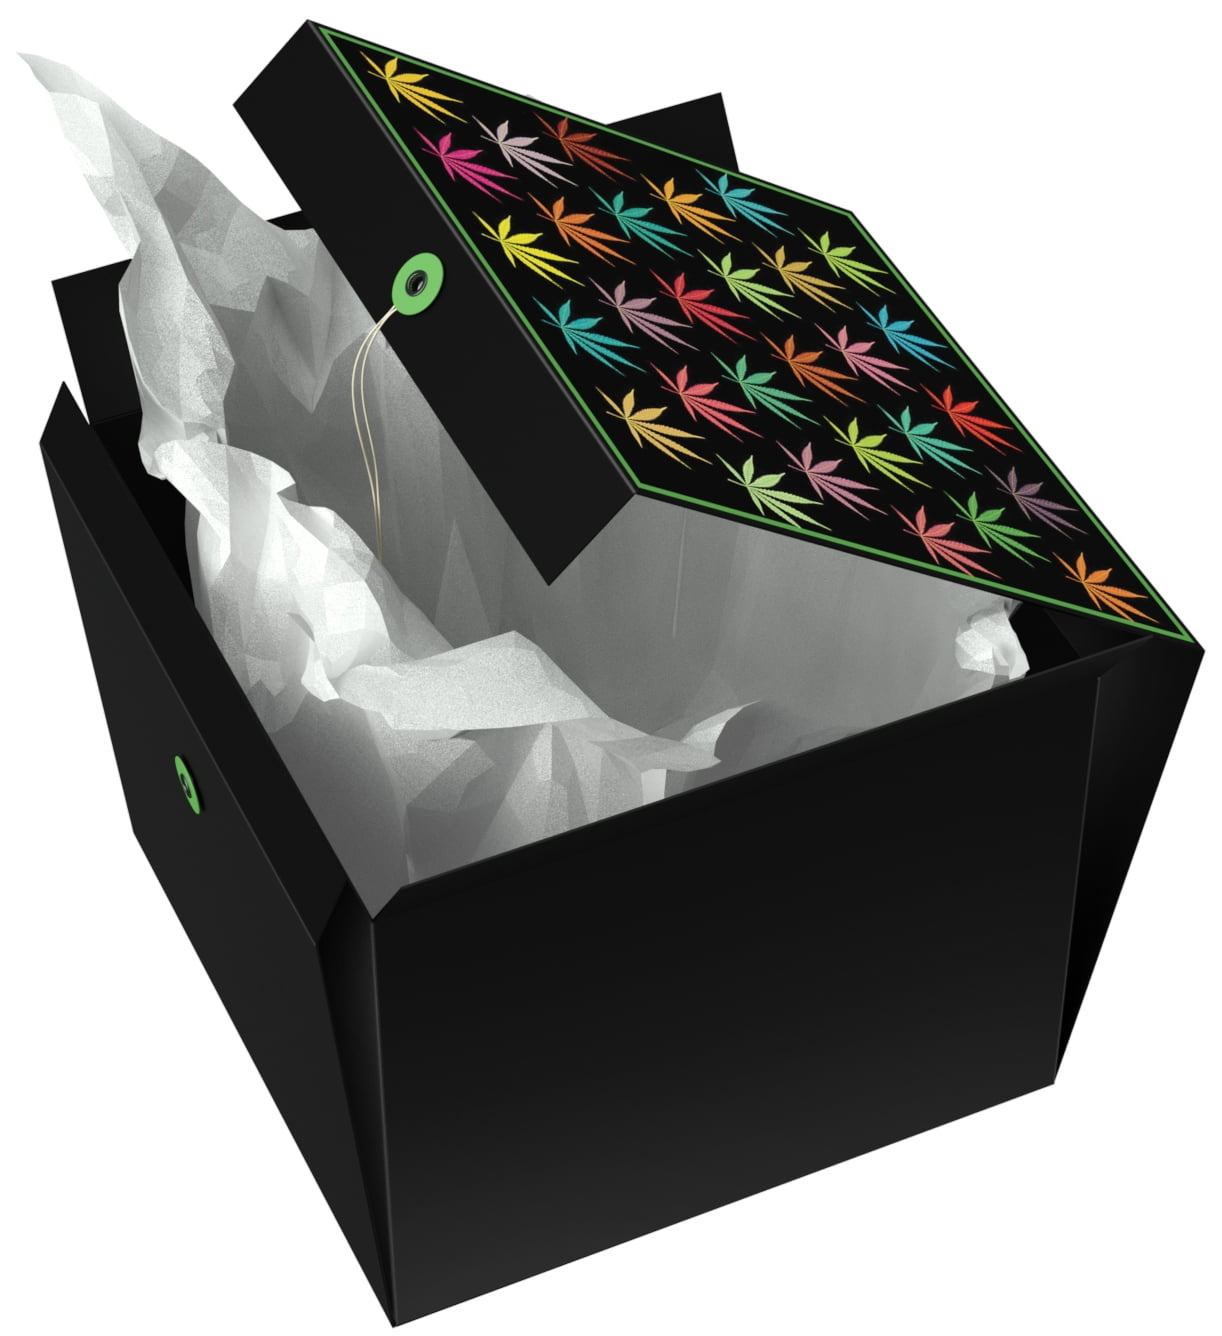 EZ Gift Box Large Gift Box Colored Leaves Kabiss 10x10x8 No Wrapping Needed Pops Up In Seconds